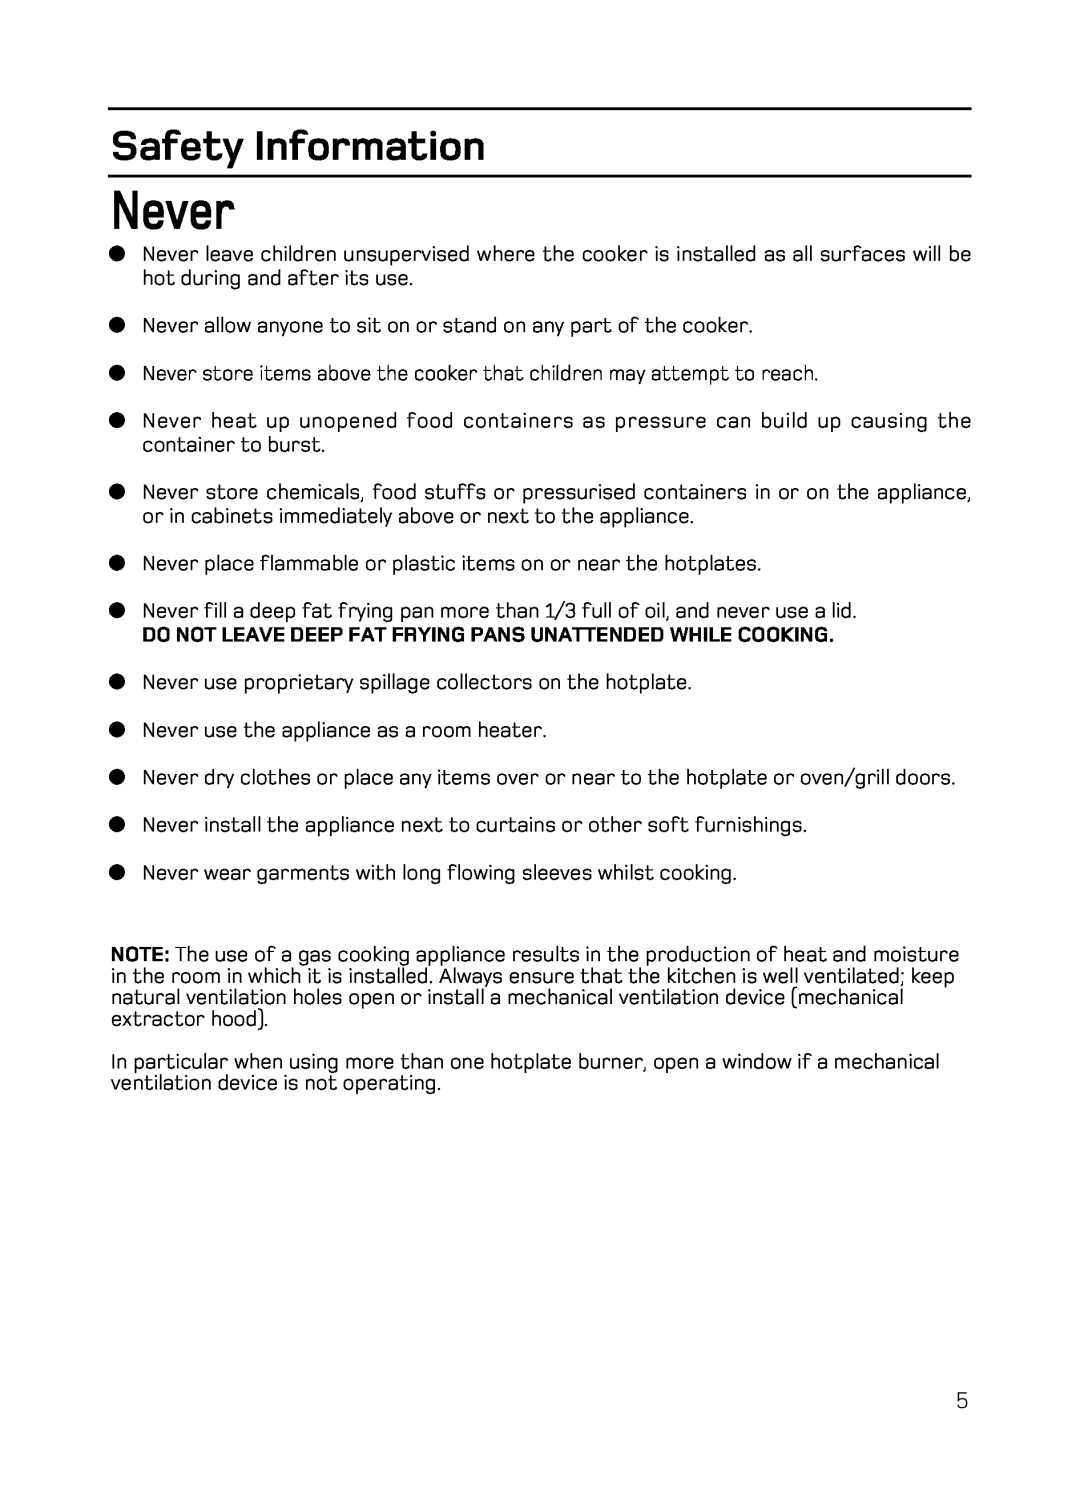 Hotpoint EG94 manual Never, Safety Information, Do Not Leave Deep Fat Frying Pans Unattended While Cooking 